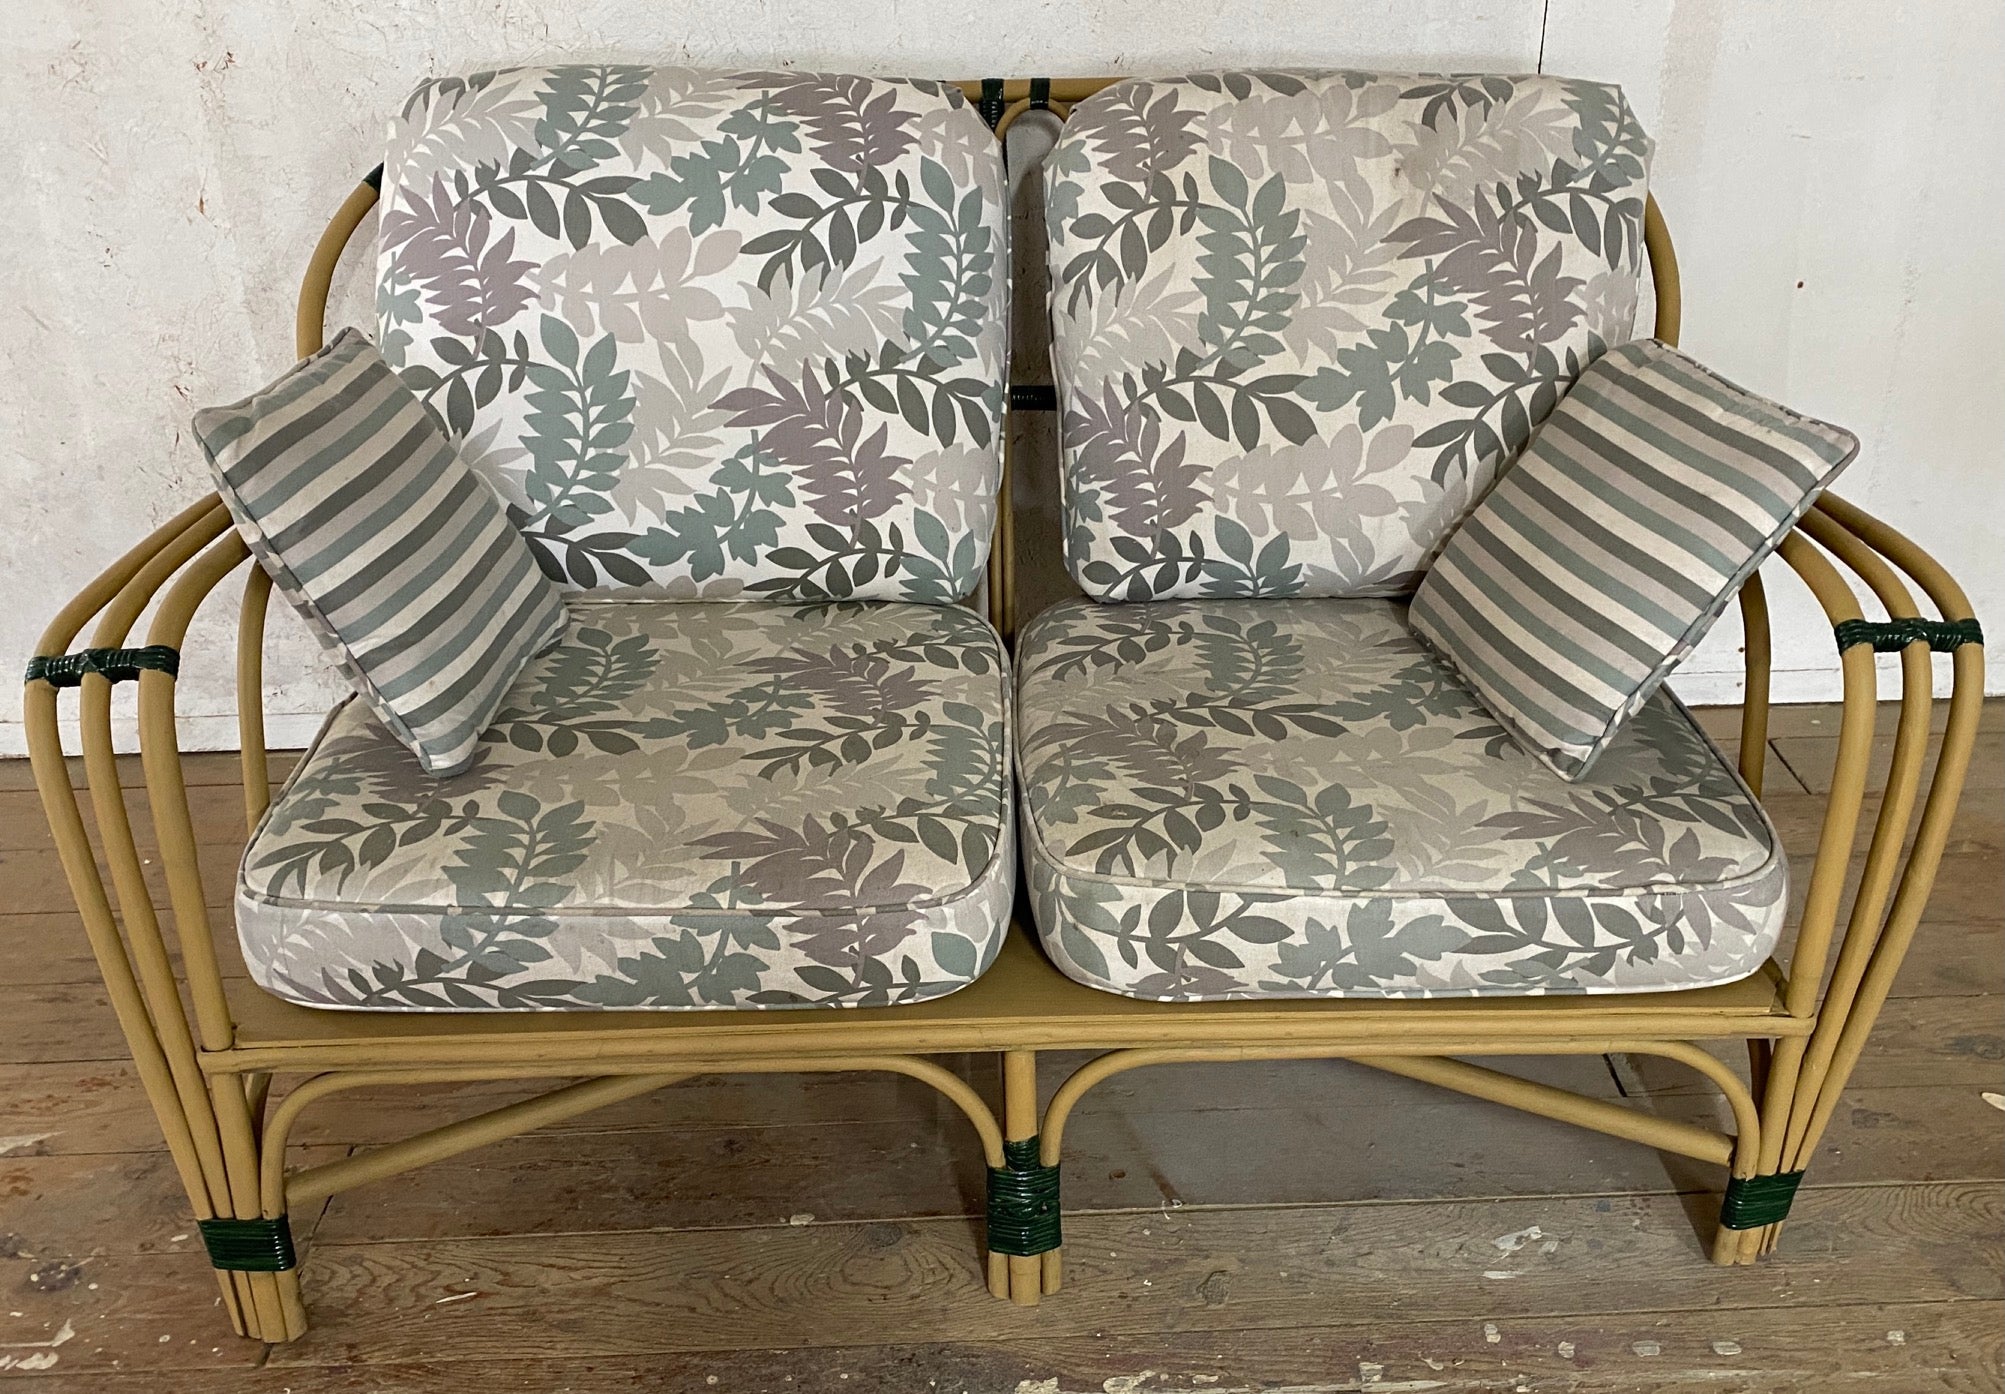 Three-piece Art Deco stick wicker / split reed set consists of two-seat sofa/settee and two matching club chairs. Wonderful design with wide arms, light yellow paint and green accent.
Measures: Arm H = 23.25/ H w/cushion = 15.75
Chair = 37.75 D x